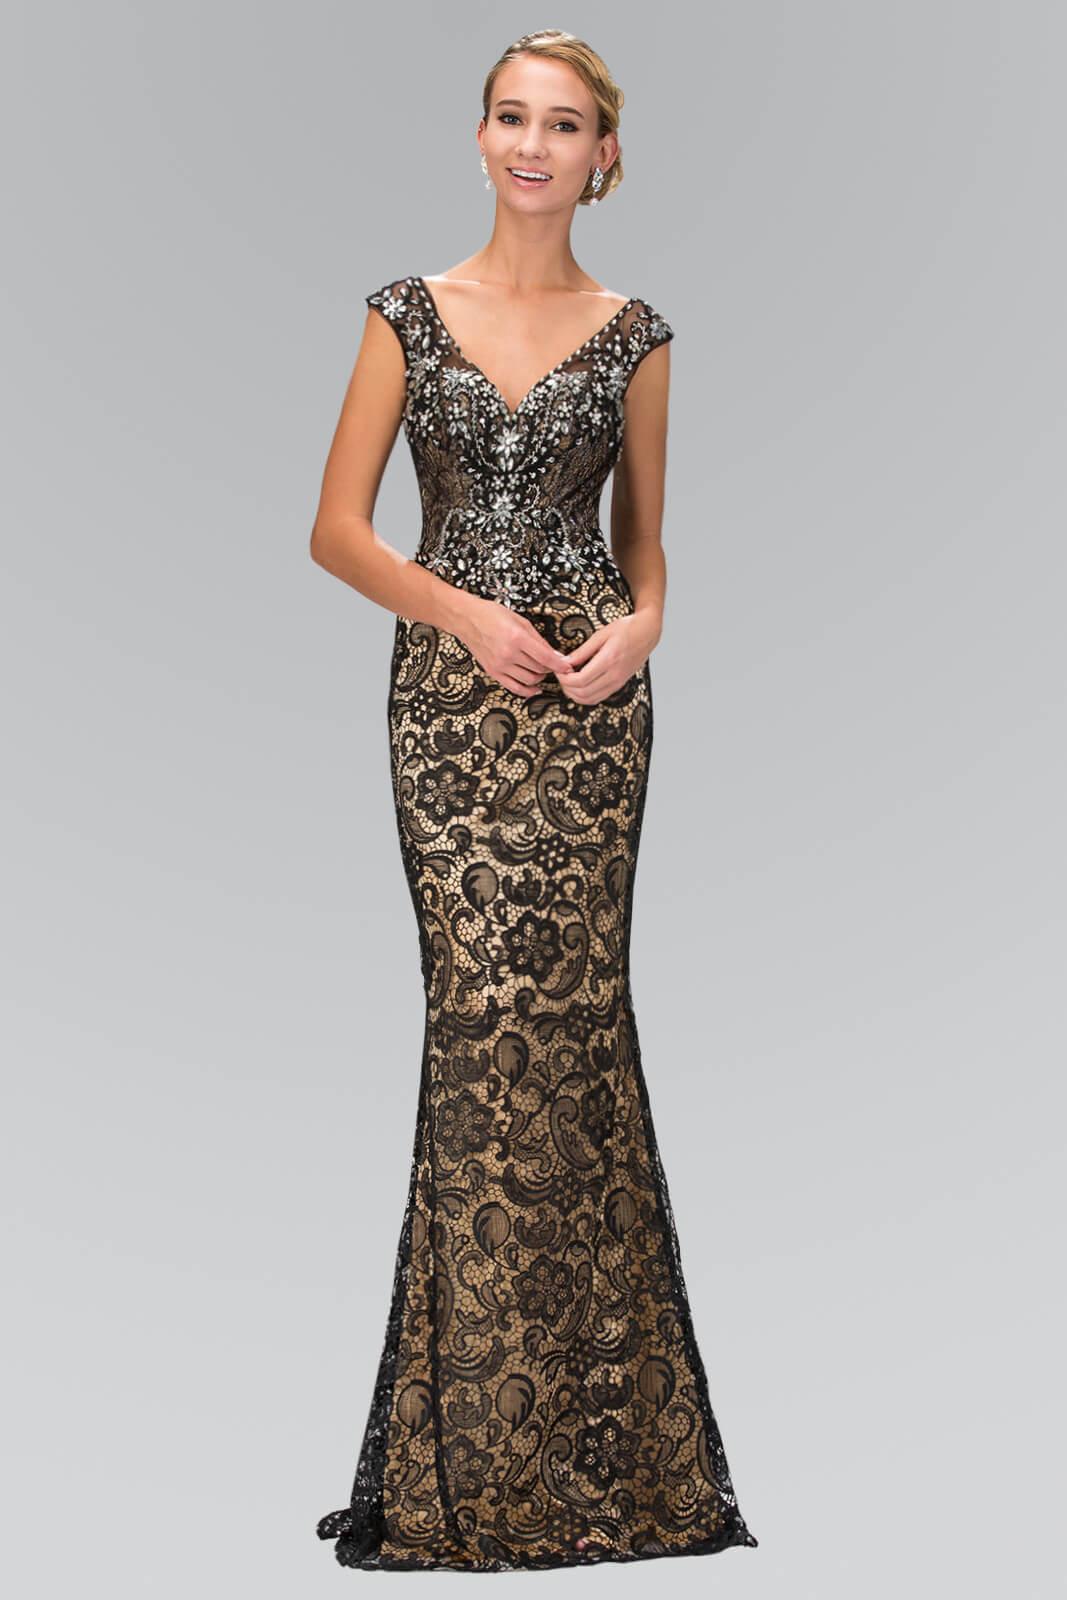 Nude Black V-Neck Lace Prom Long Dress Formal for $204.99 – The Dress ...